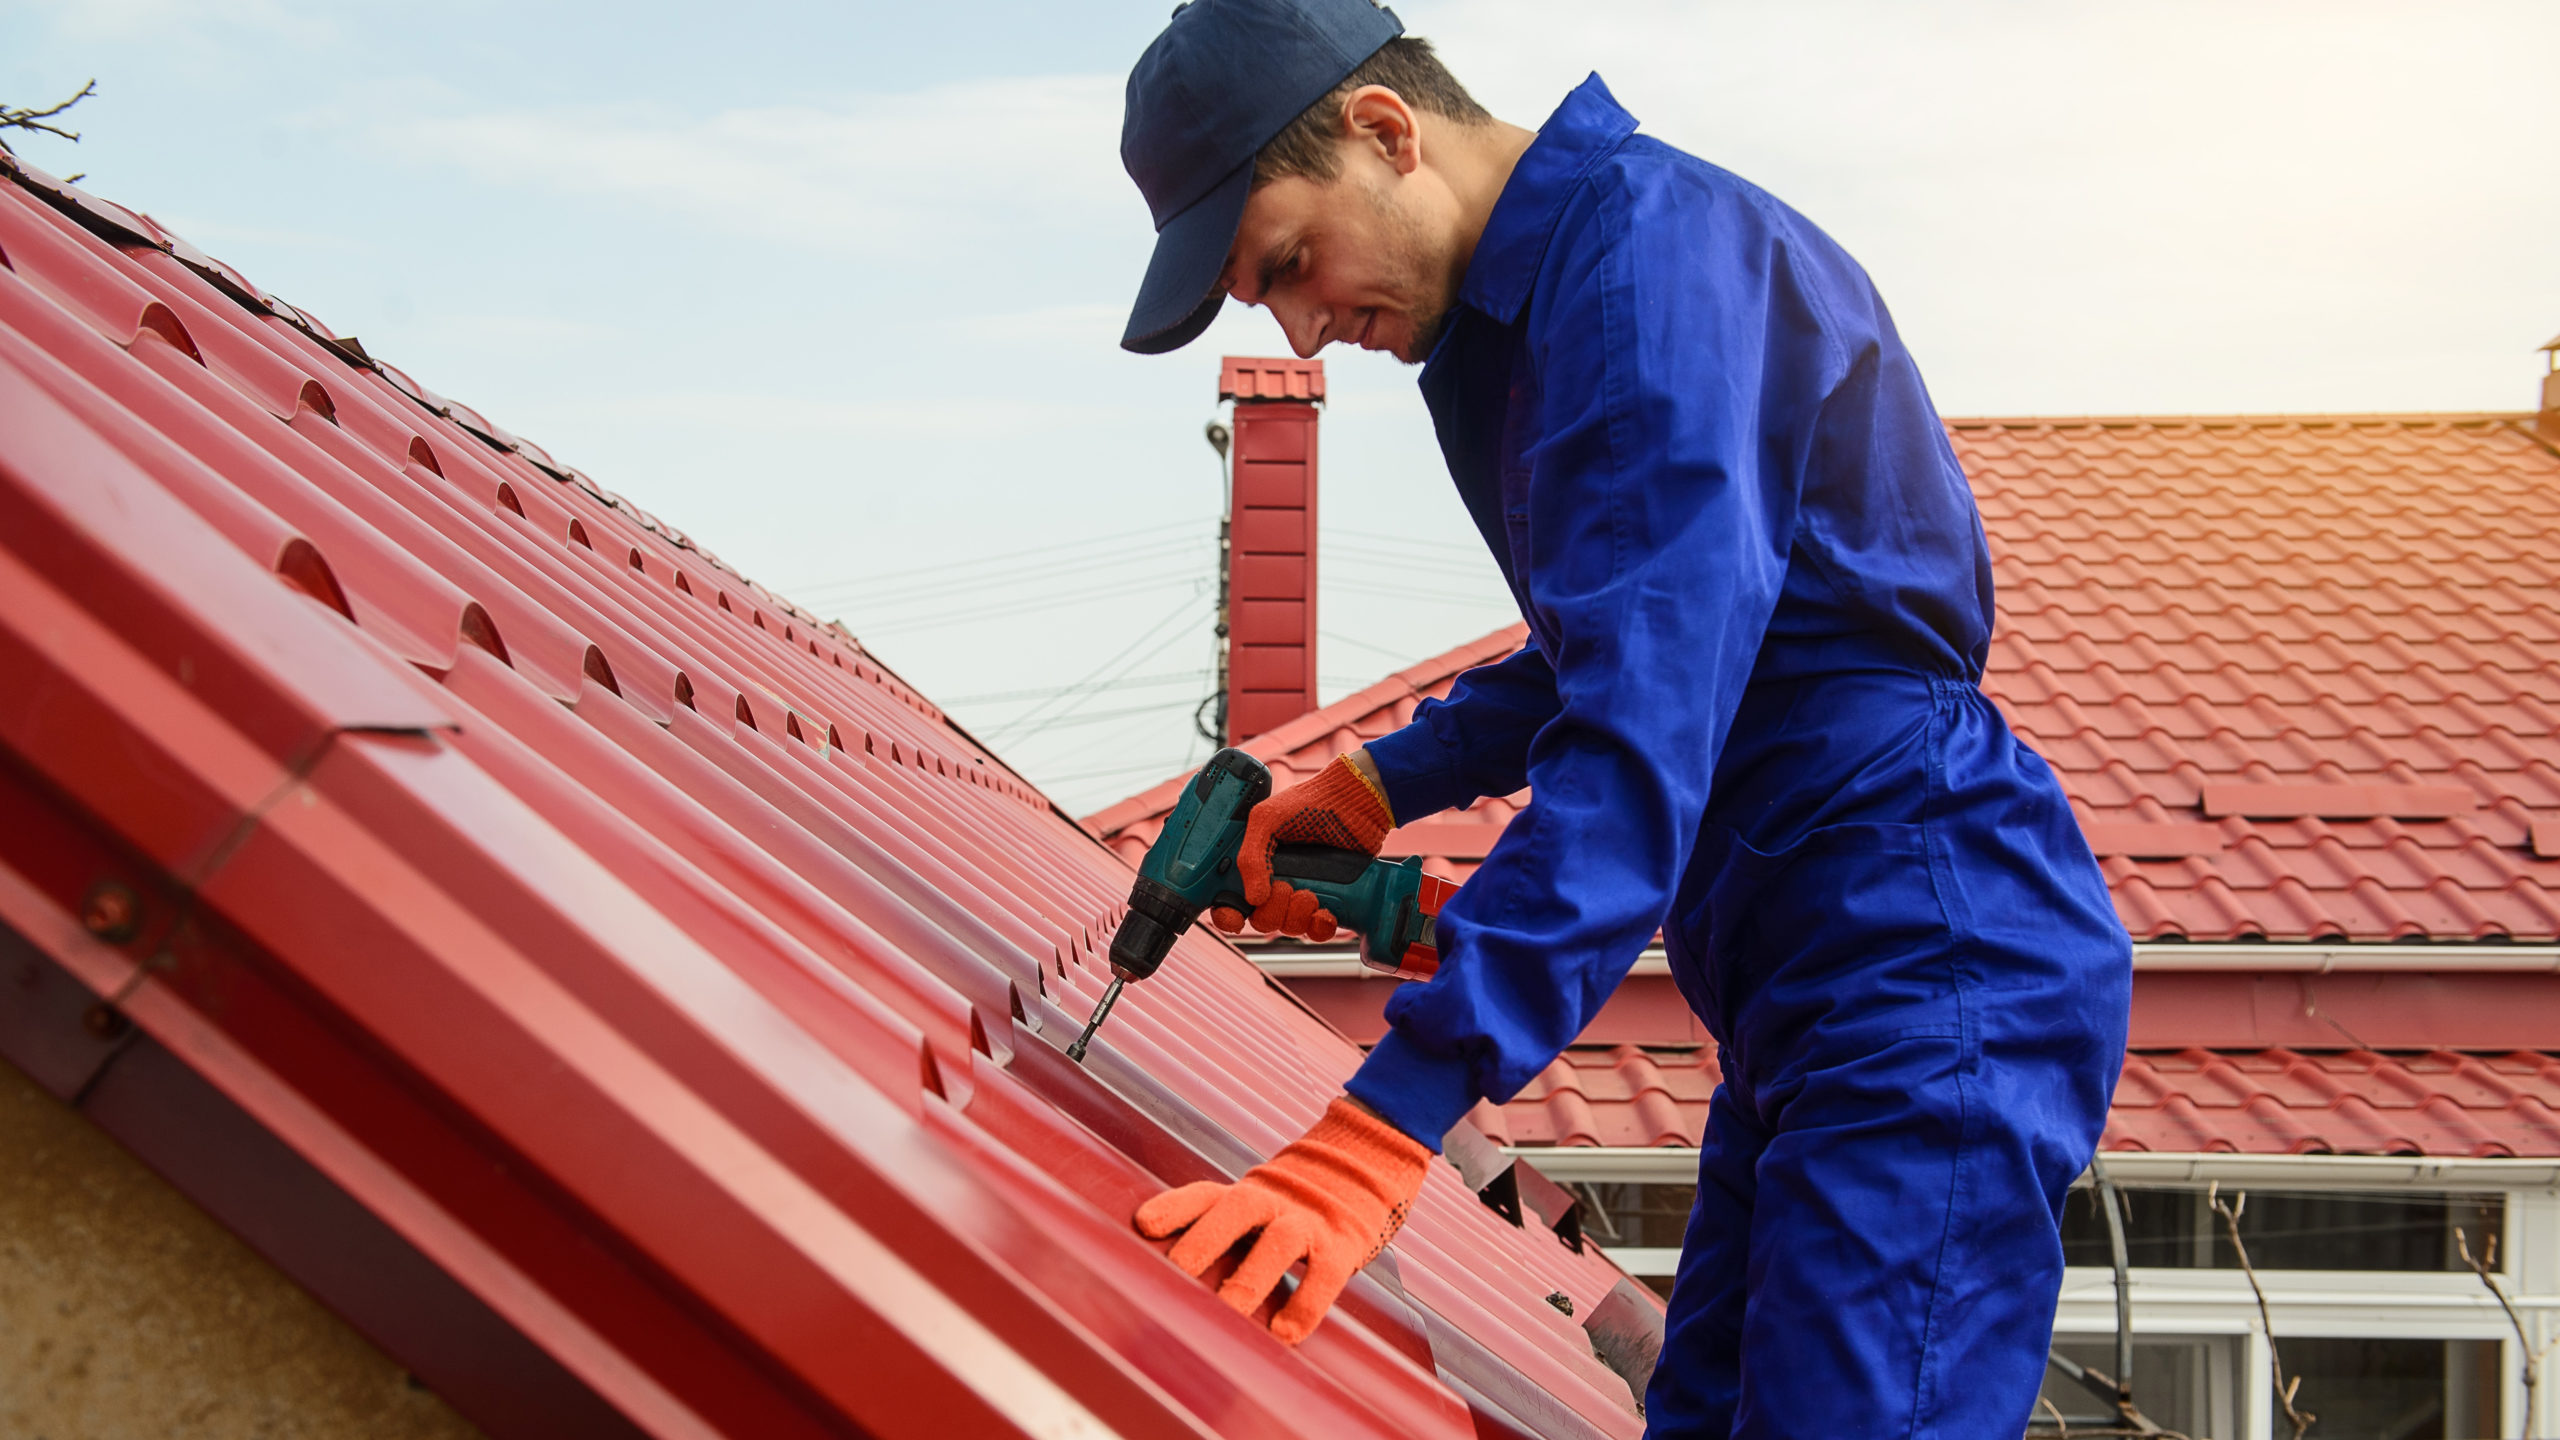 https://www.rpsmetalroofing.com/wp-content/uploads/2020/09/roofer-screwing-in-red-metal-roof-tile-scaled.jpg